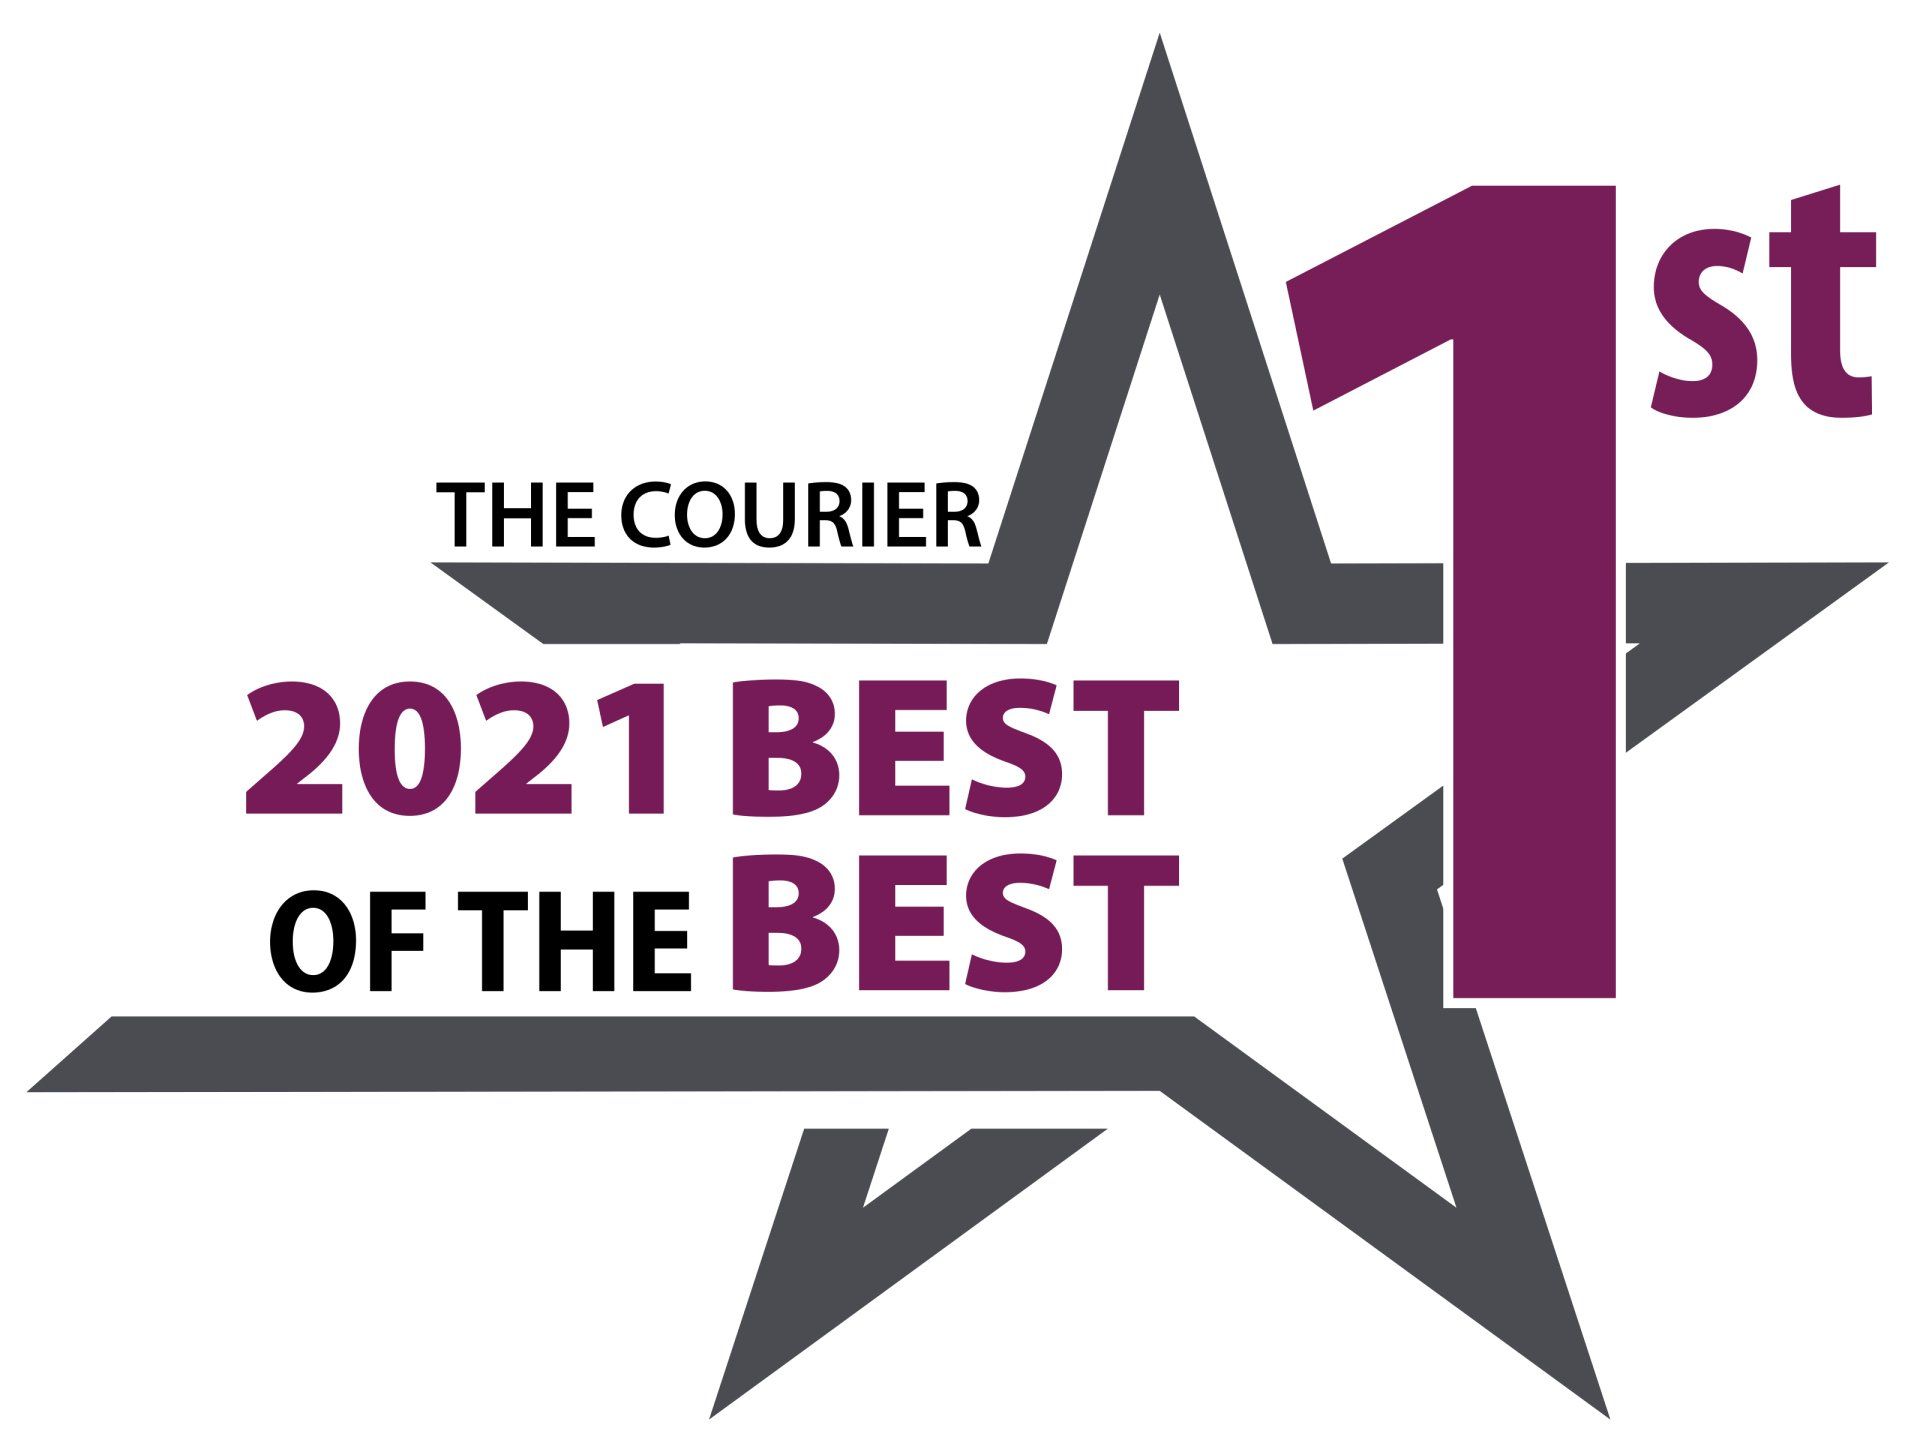 The Courier 2021 Best of the Best